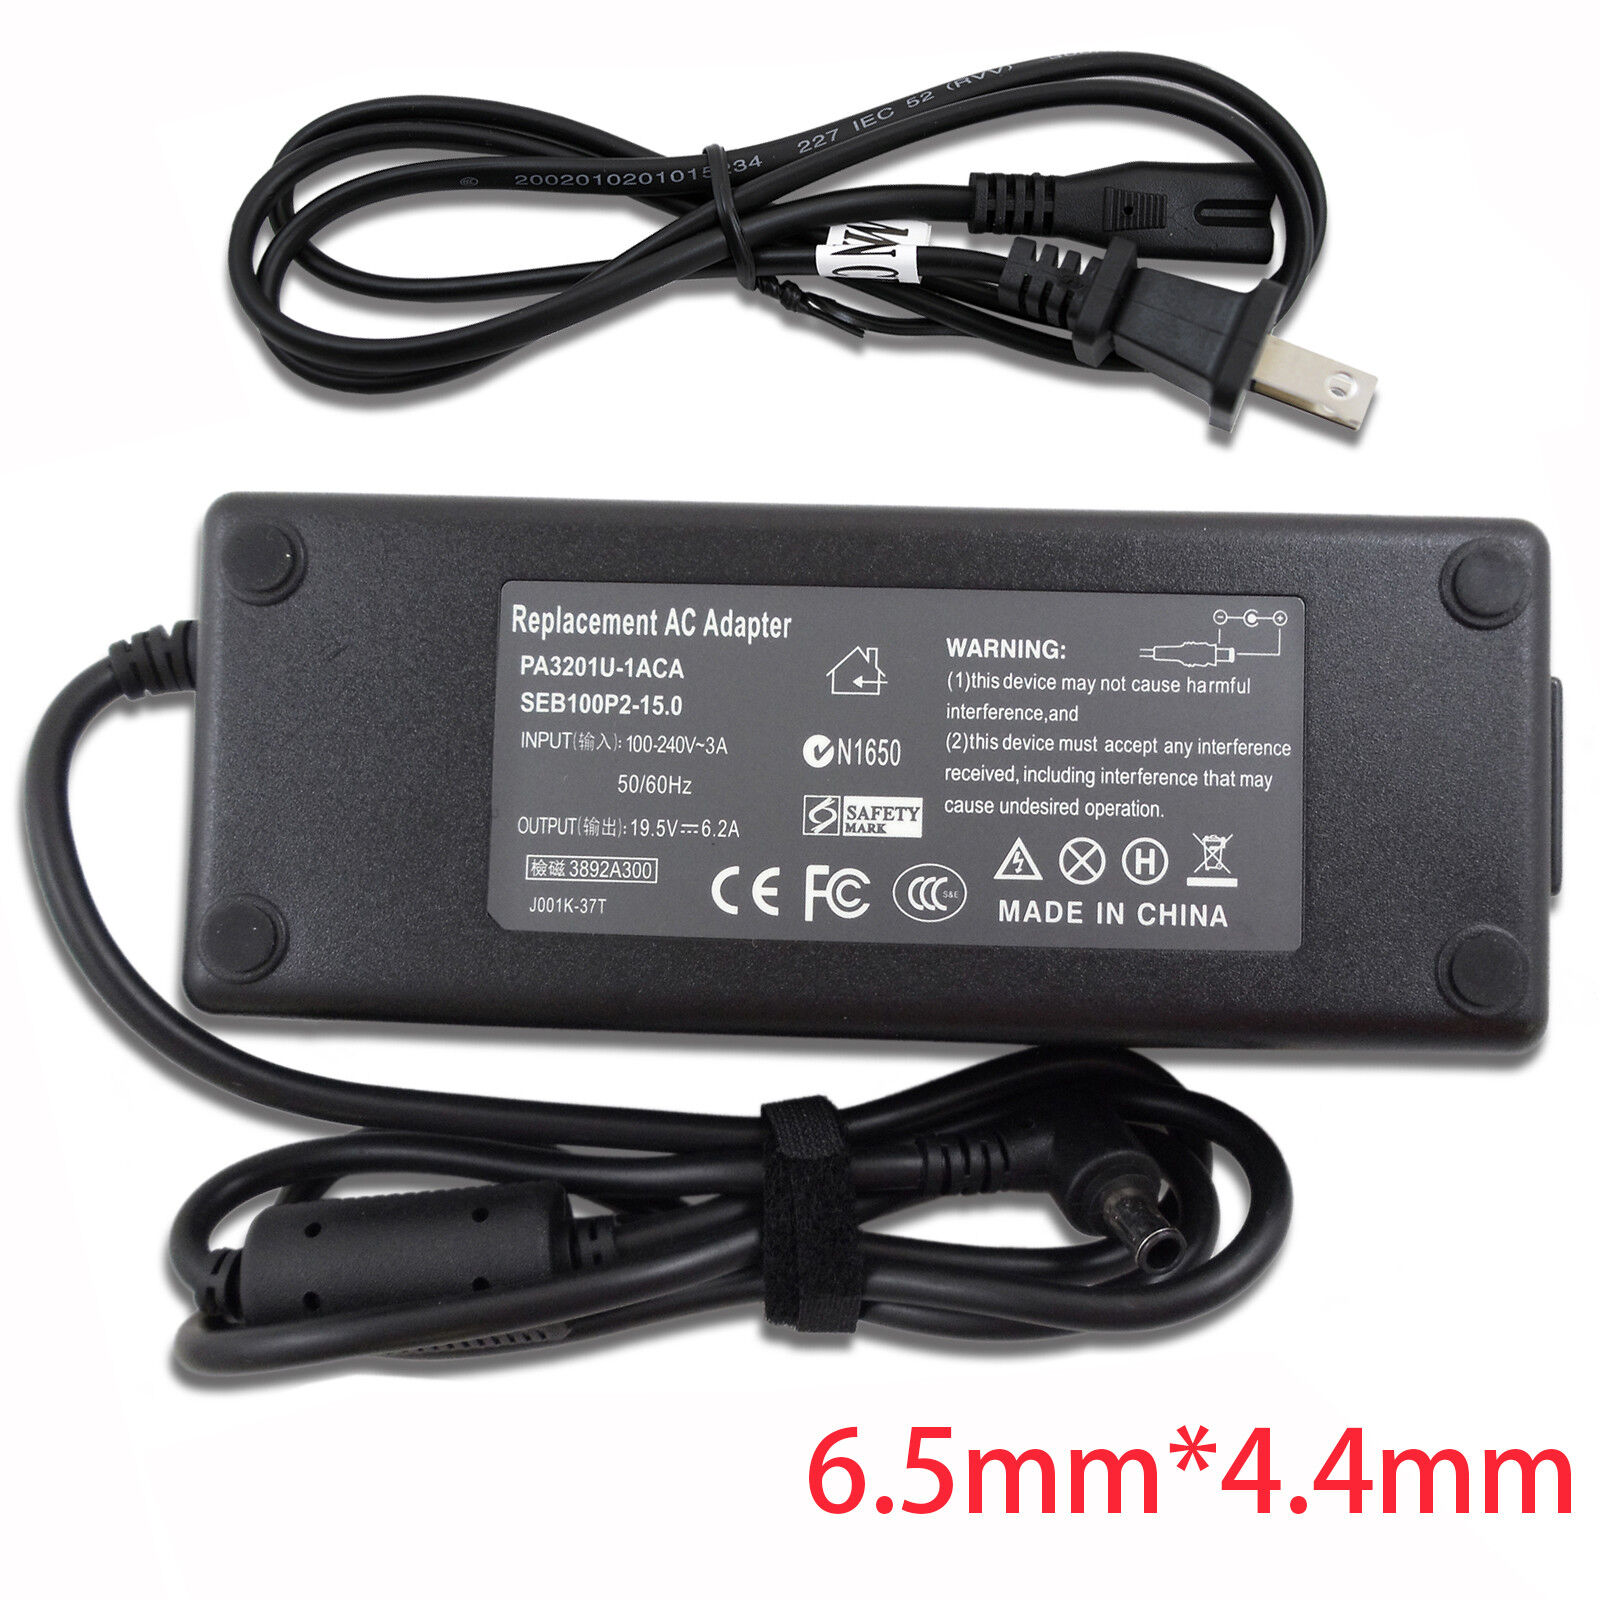 19.5V 120W AC Power Adapter Charger for Sony Bravia KDL-50W807B KDL-50W700B Cord